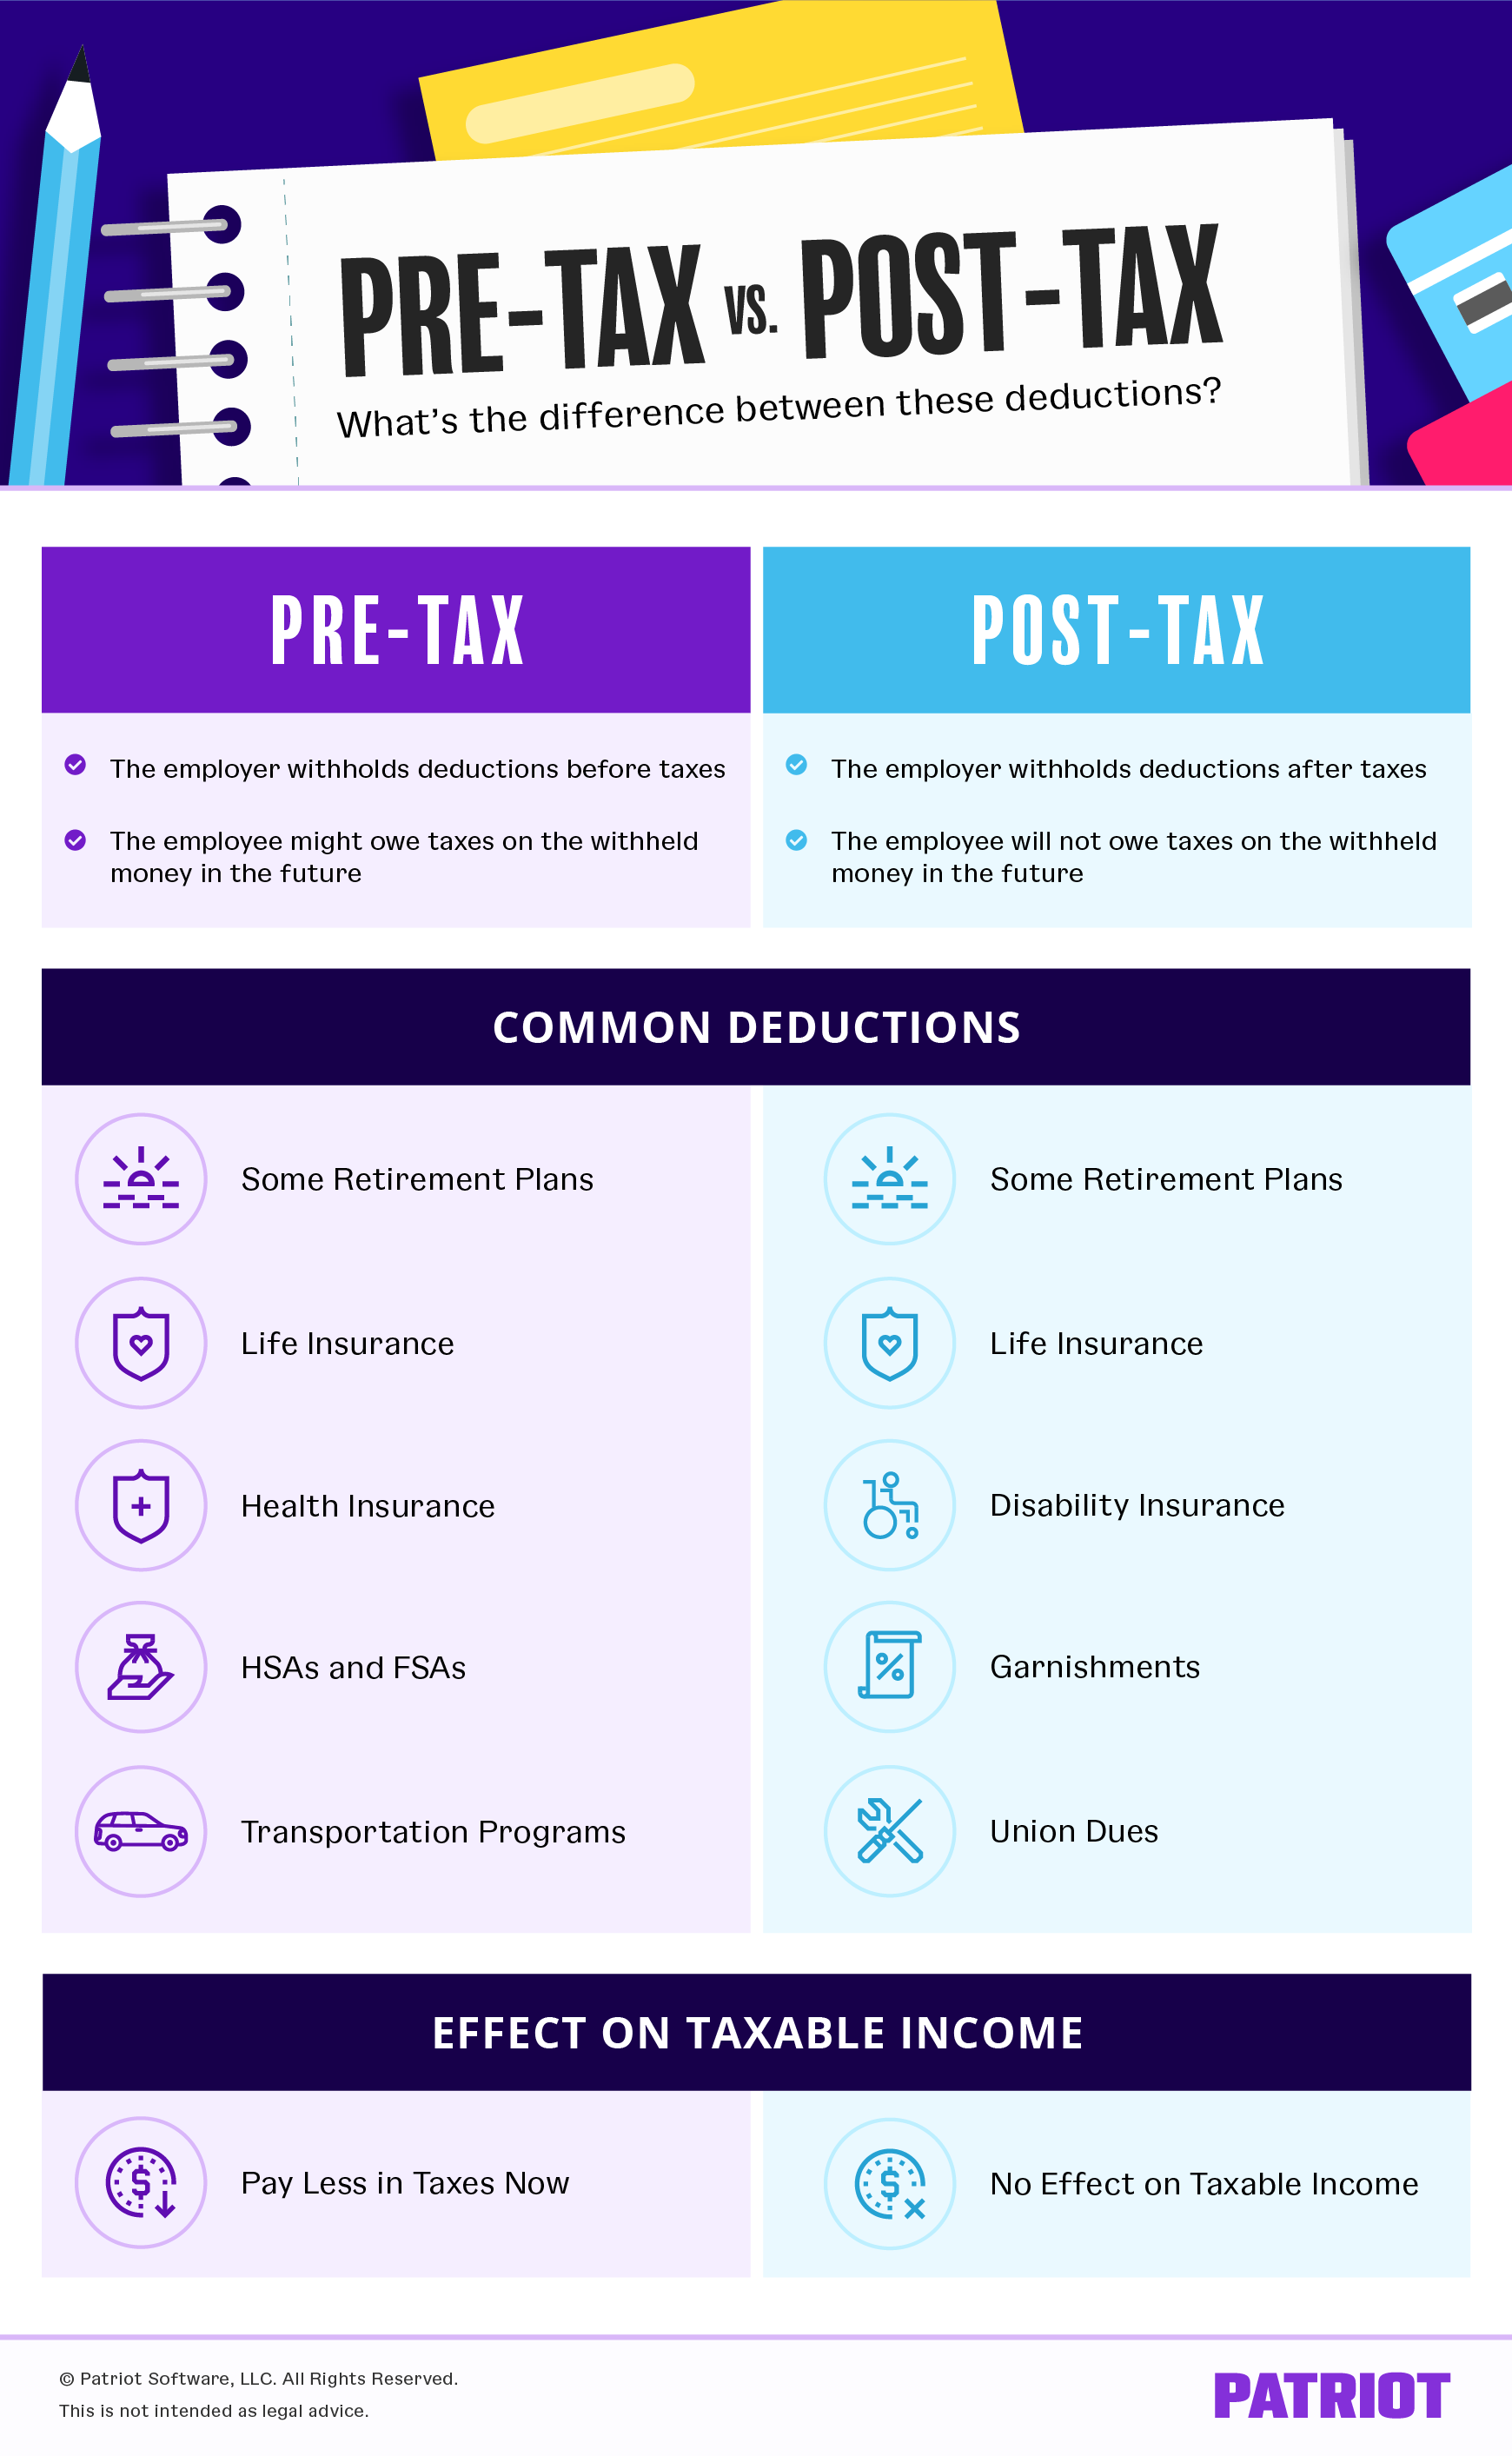 pre-tax-vs-post-tax-deductions-what-s-the-difference